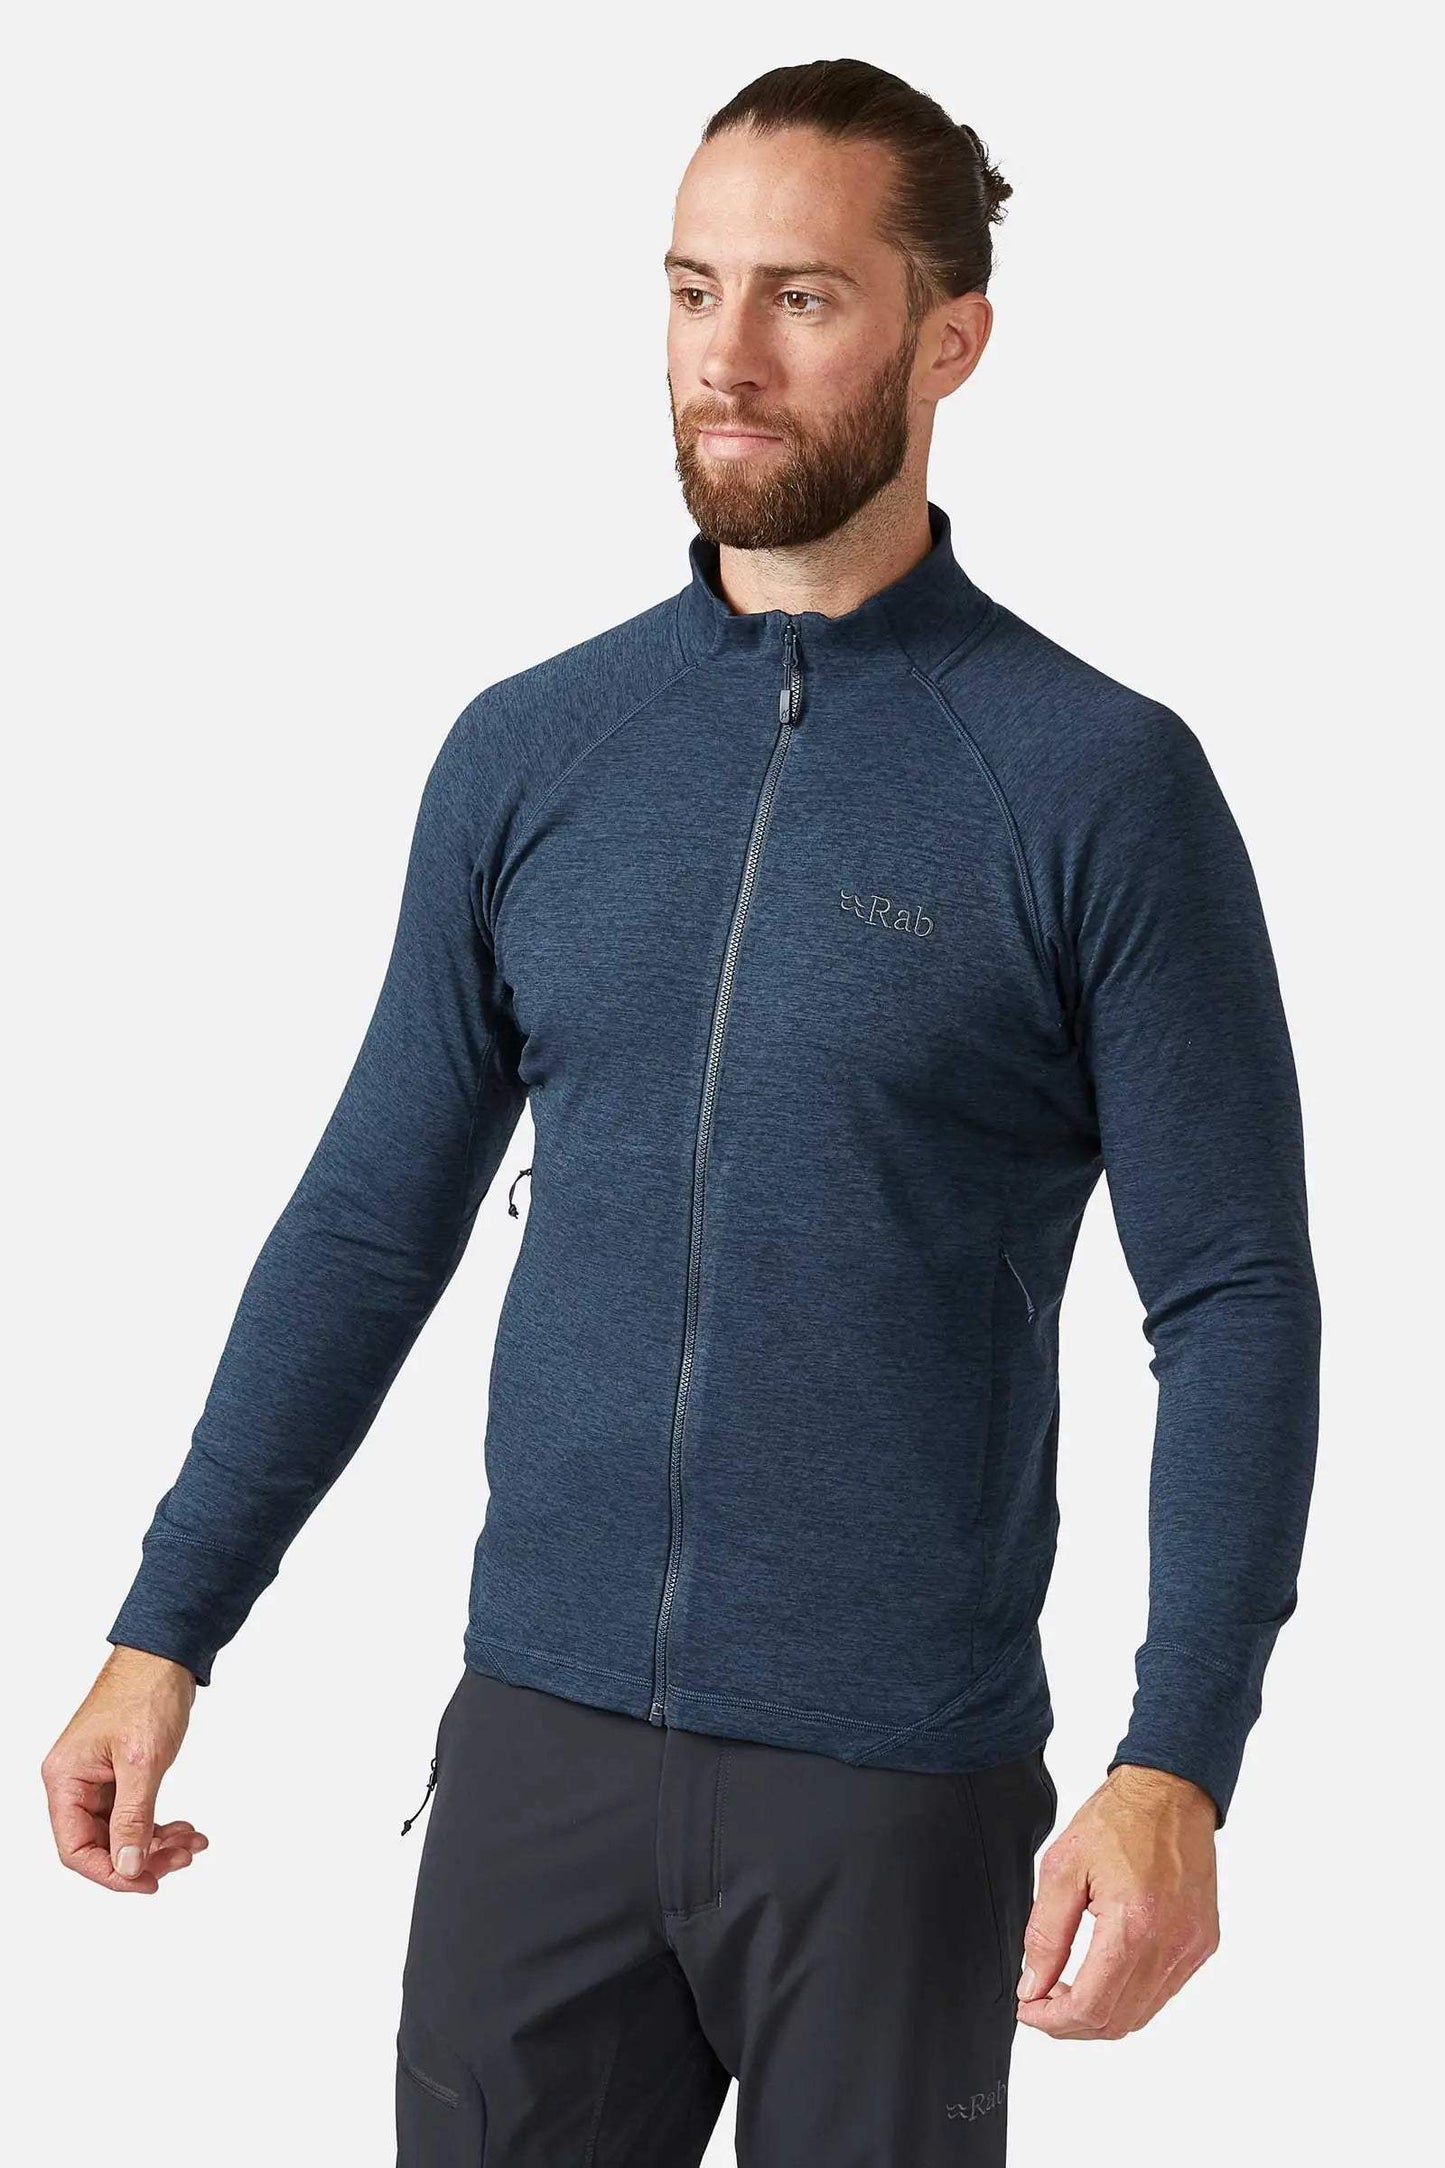 Men’s Nexus Jacket by RAB - The Luxury Promotional Gifts Company Limited